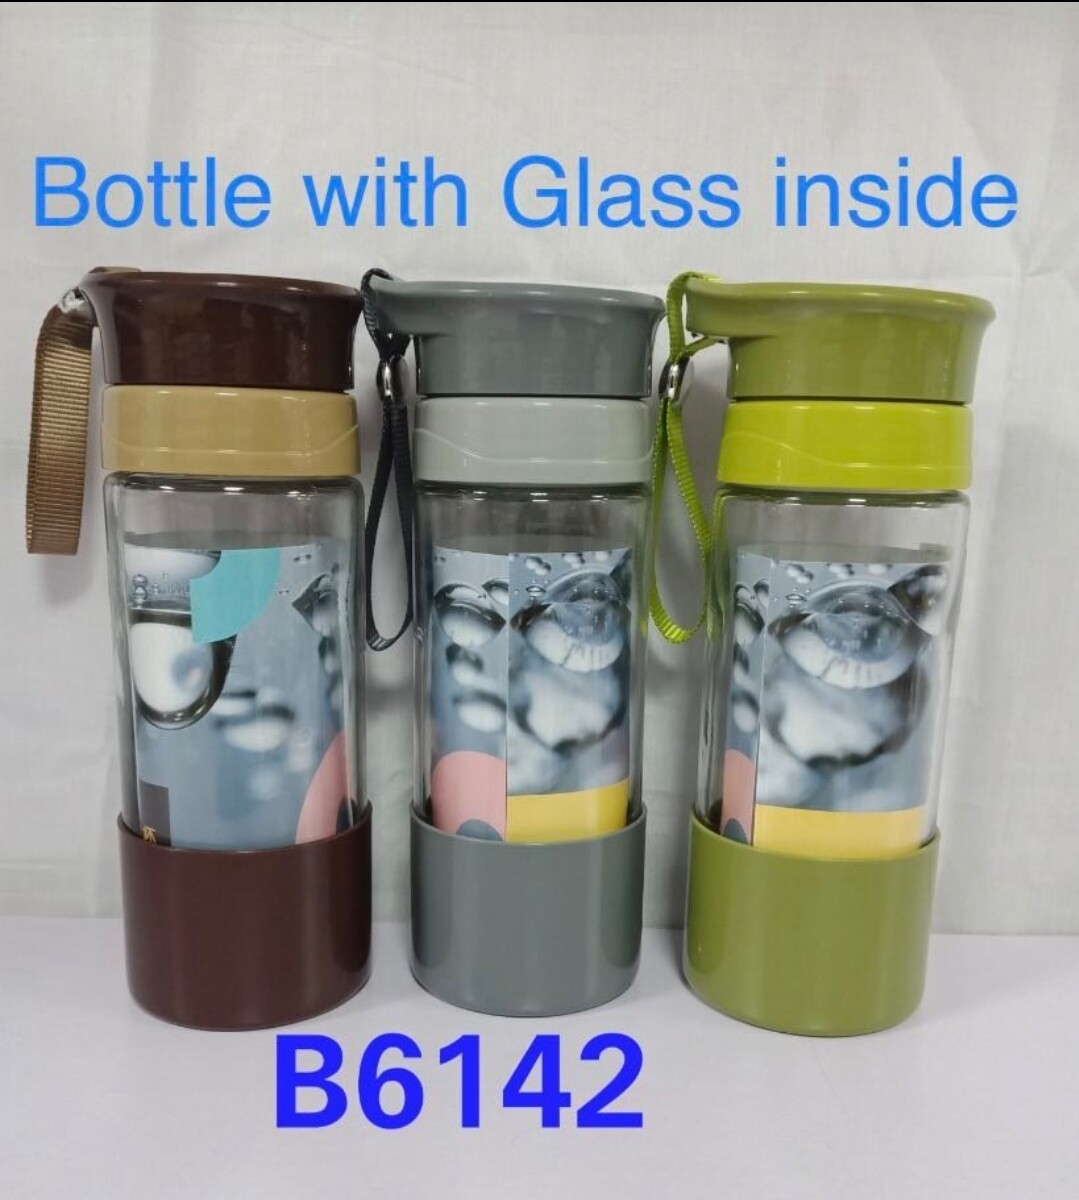 Water bottle with glass inside B6142